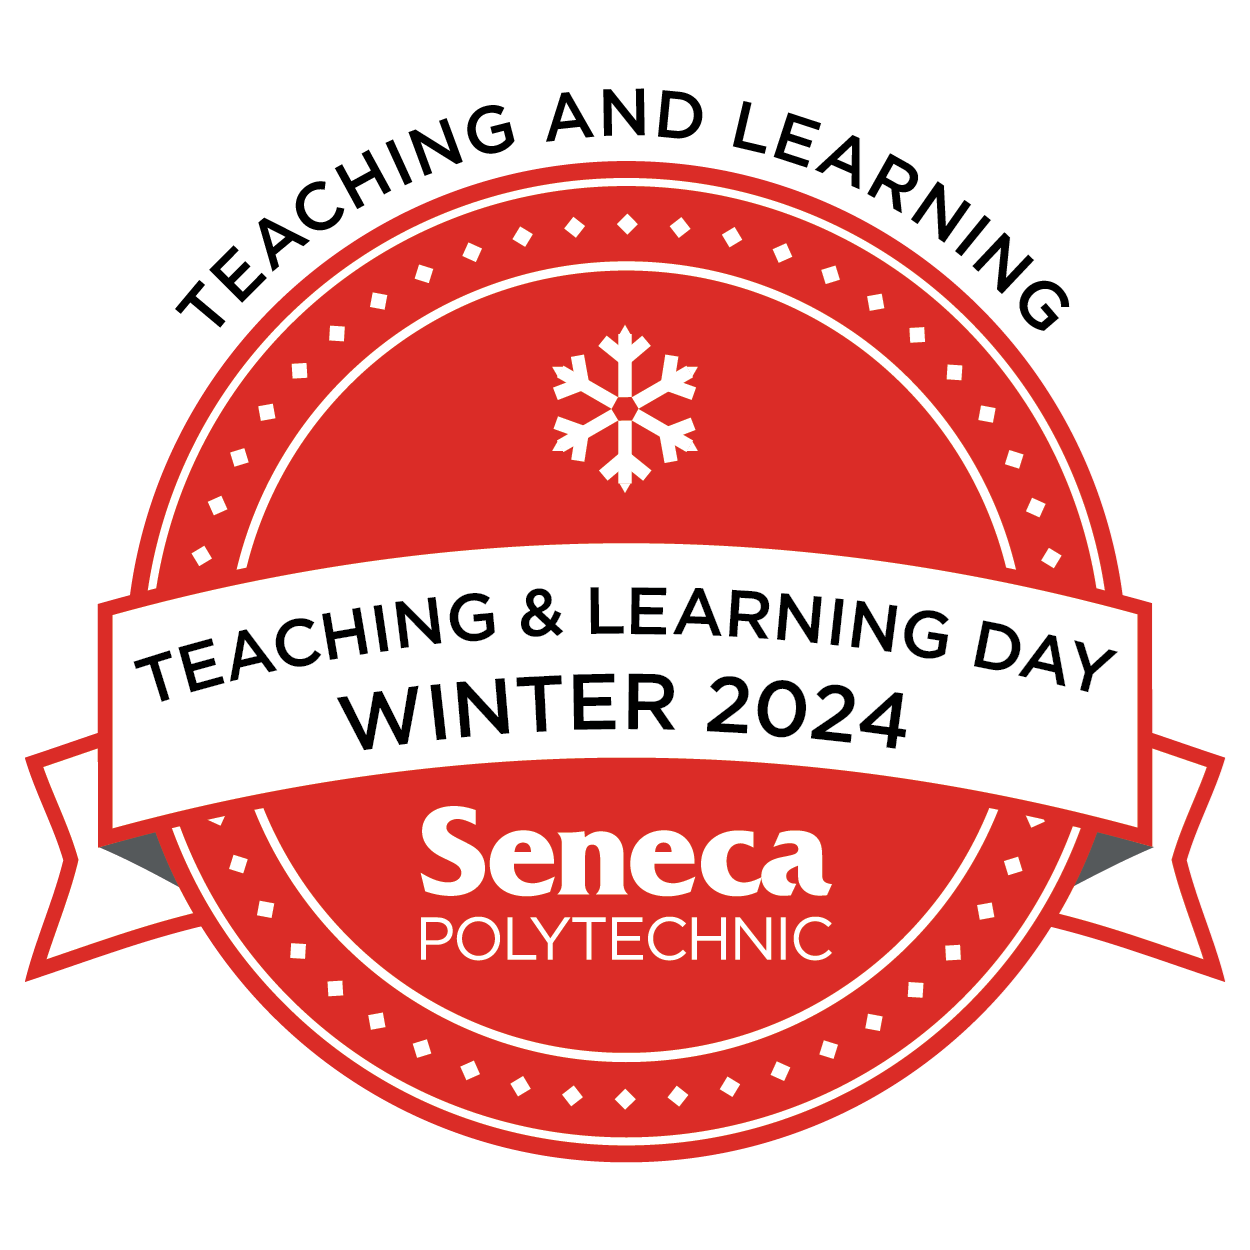 the micro-credential for Teaching & Learning Day Winter 2024